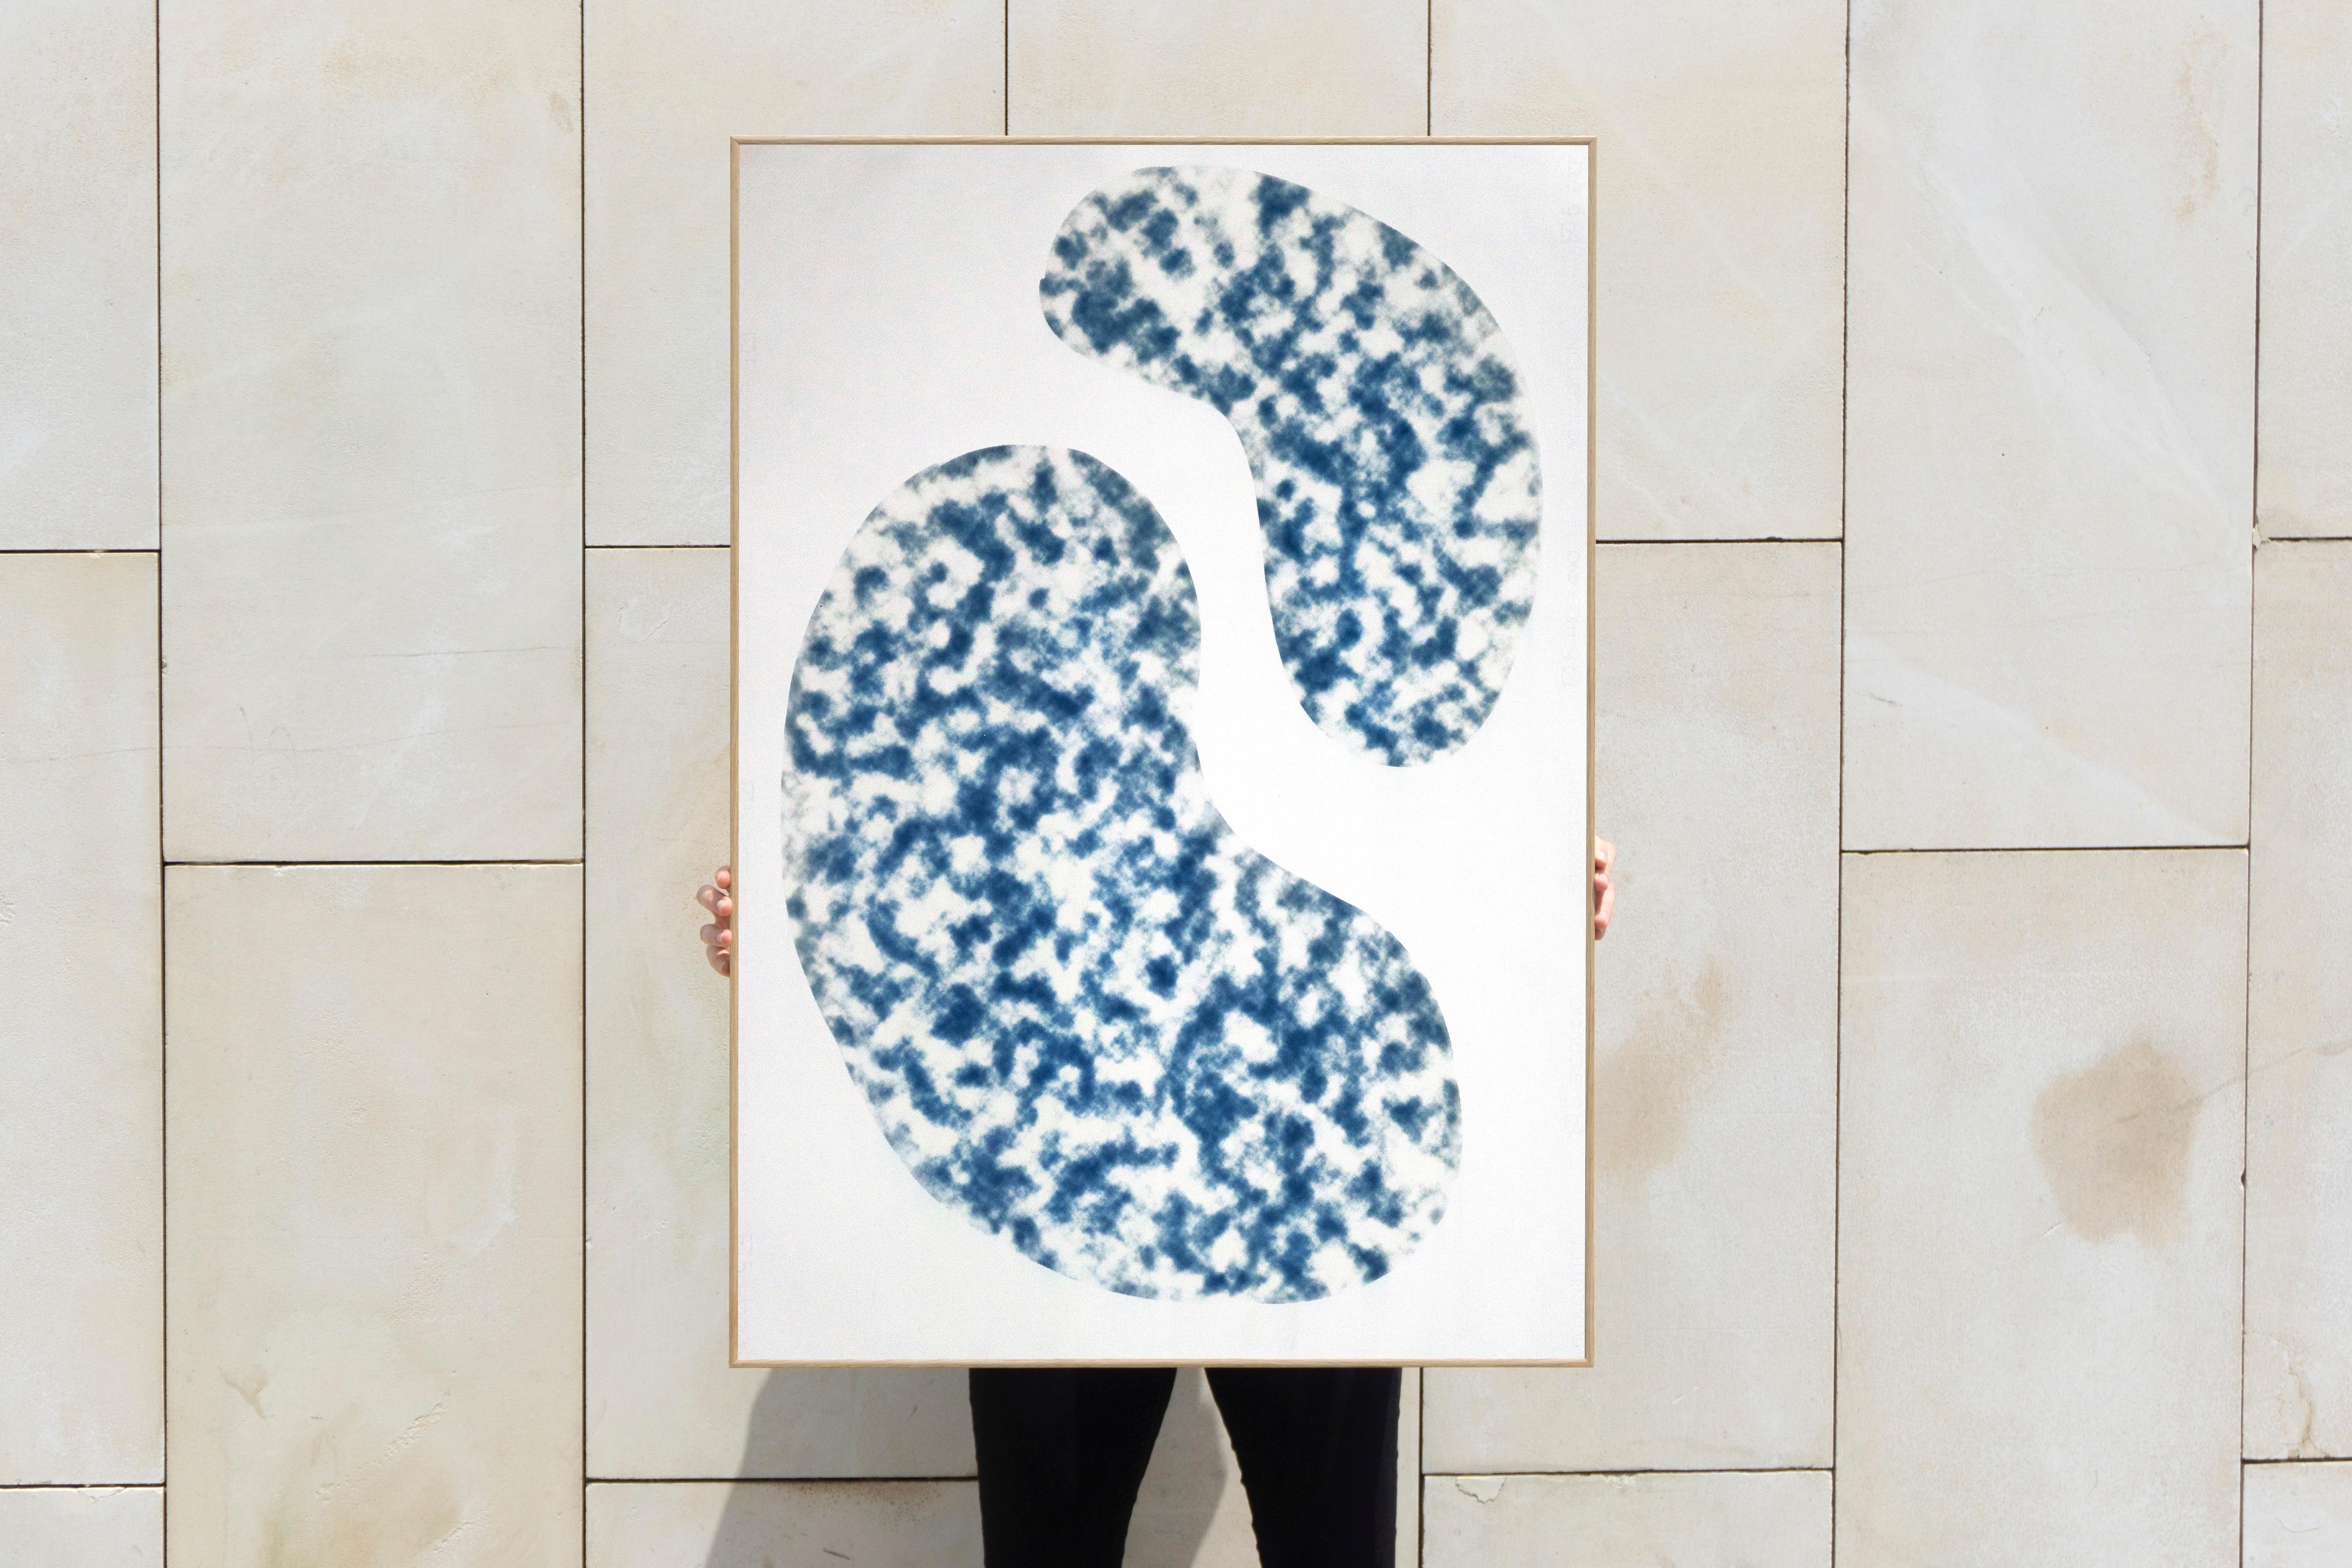 Kidney Bean Pools, Minimal Cyanotype Inspired by Architectural Pools, Cloudy  - Photograph by Kind of Cyan